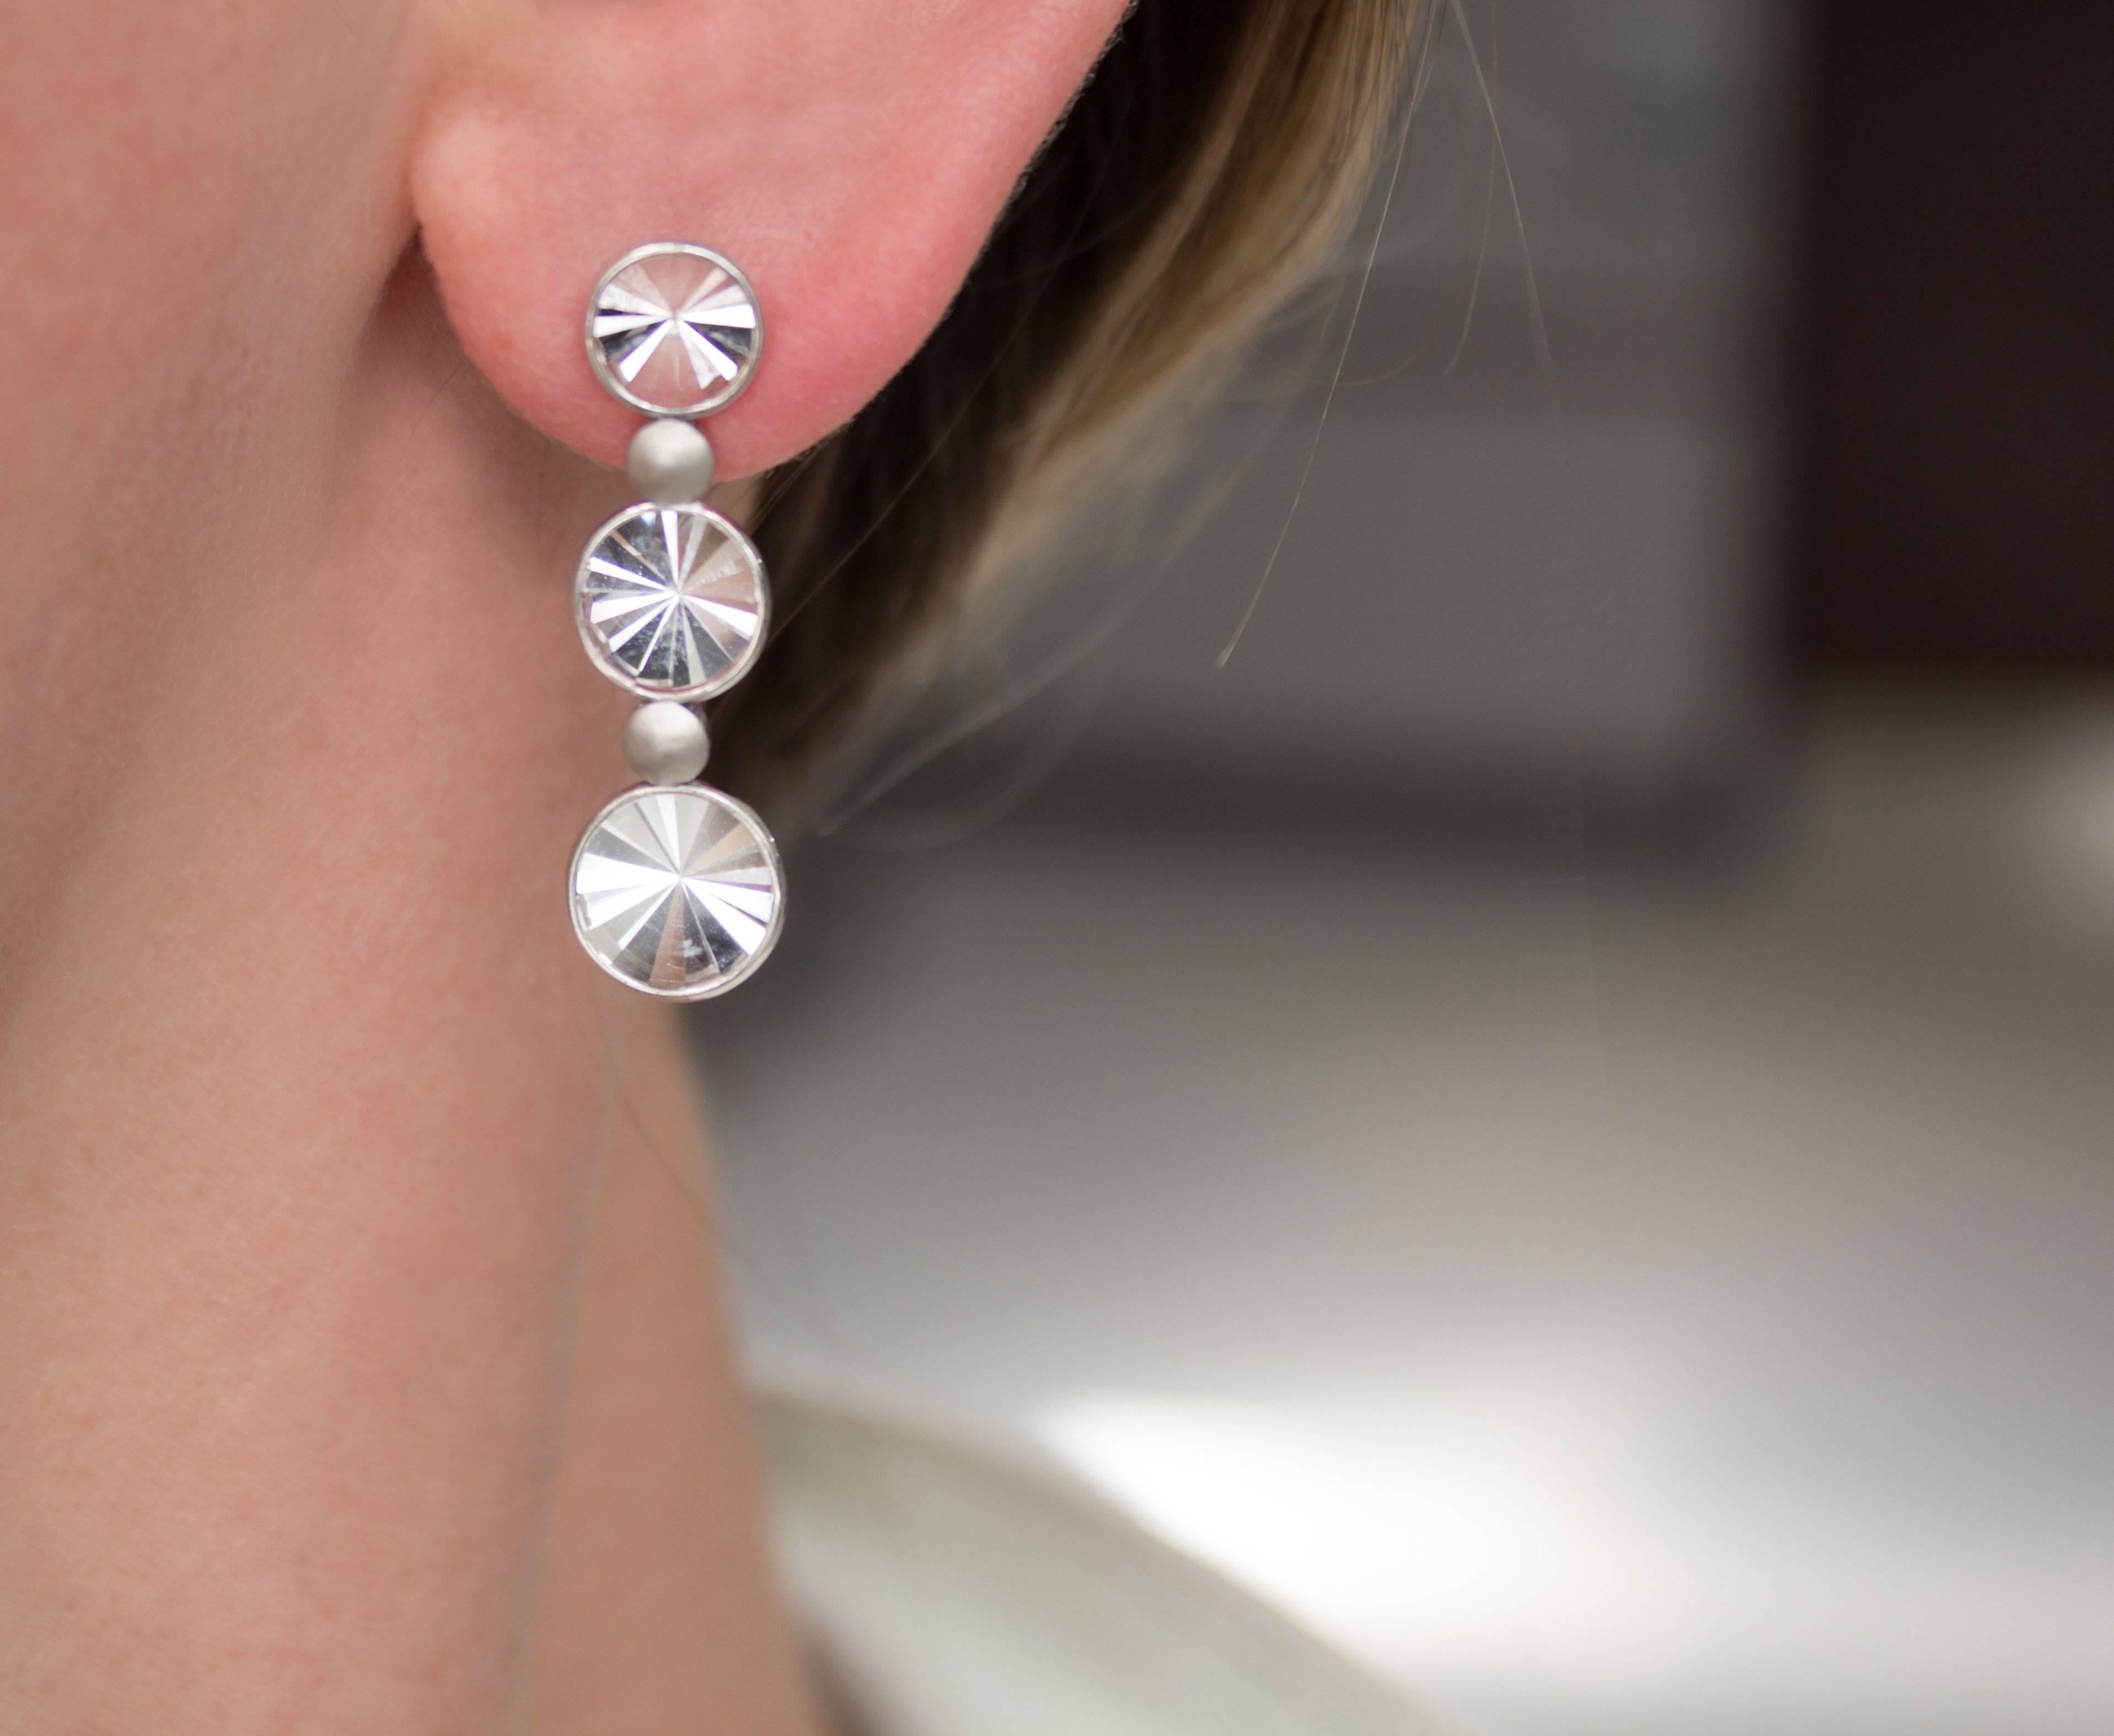 One of a Kind Waterfall Earrings handcrafted in Brazil by jewelry designer Antonio Bernardo featuring six round prism-cut rock crystal quartz elements set in matte finished and polished 18k white gold. Stamped 750 / Antonio Bernardo / with AB